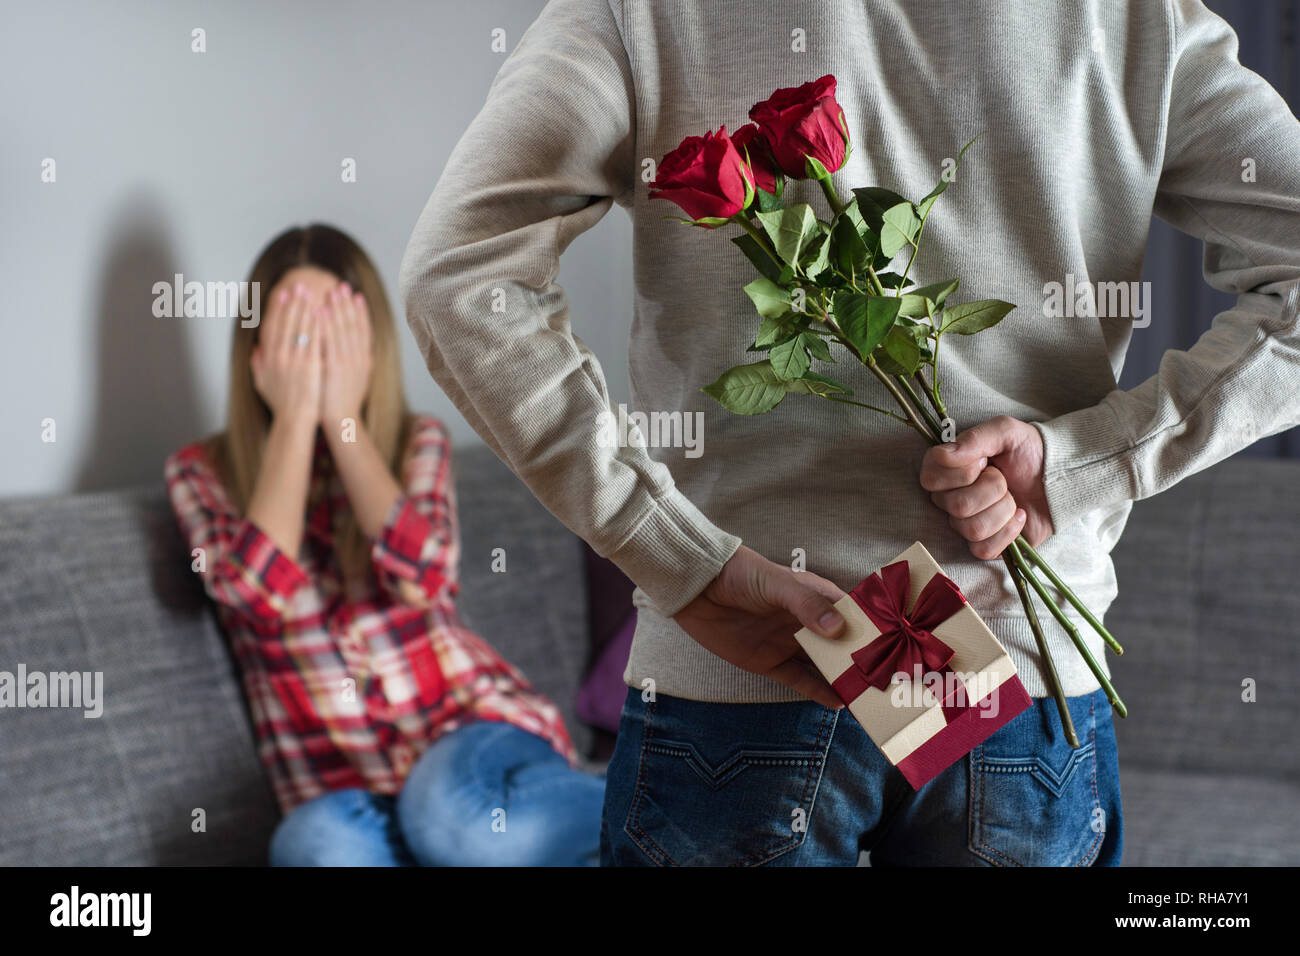 Young mans hands hiding holding chic bouquet of red roses and gift with white ribbon behind back and woman with hands over her face awaits surprise Stock Photo